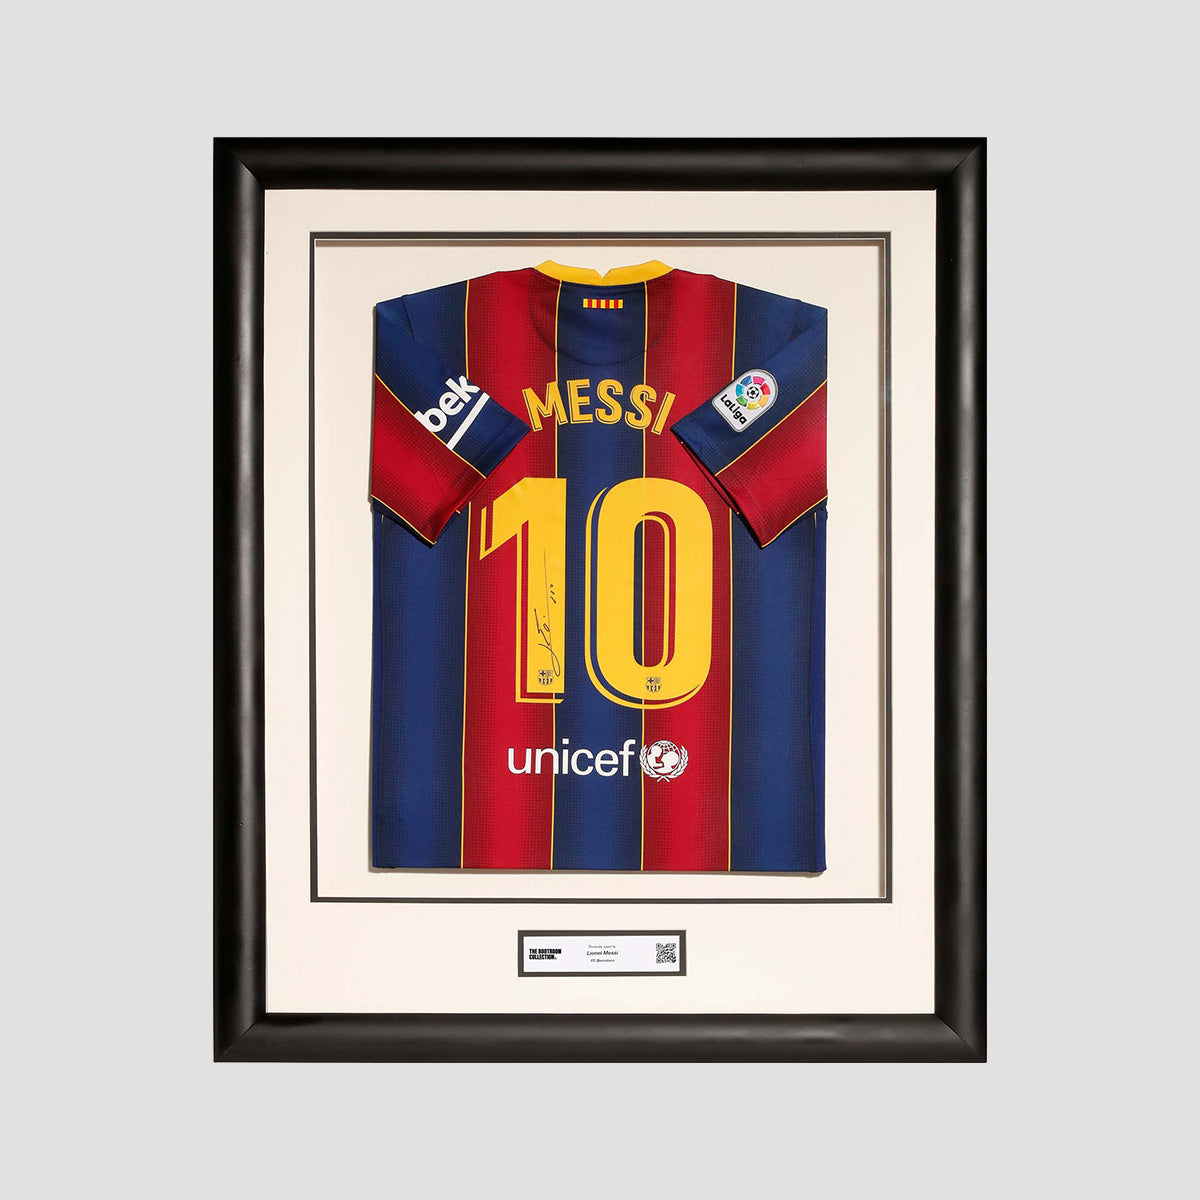 MATCH ISSUE Lionel Messi Official FC Barcelona Back Signed 2020-21 Home Shirt (Framed) - The Bootroom Collection